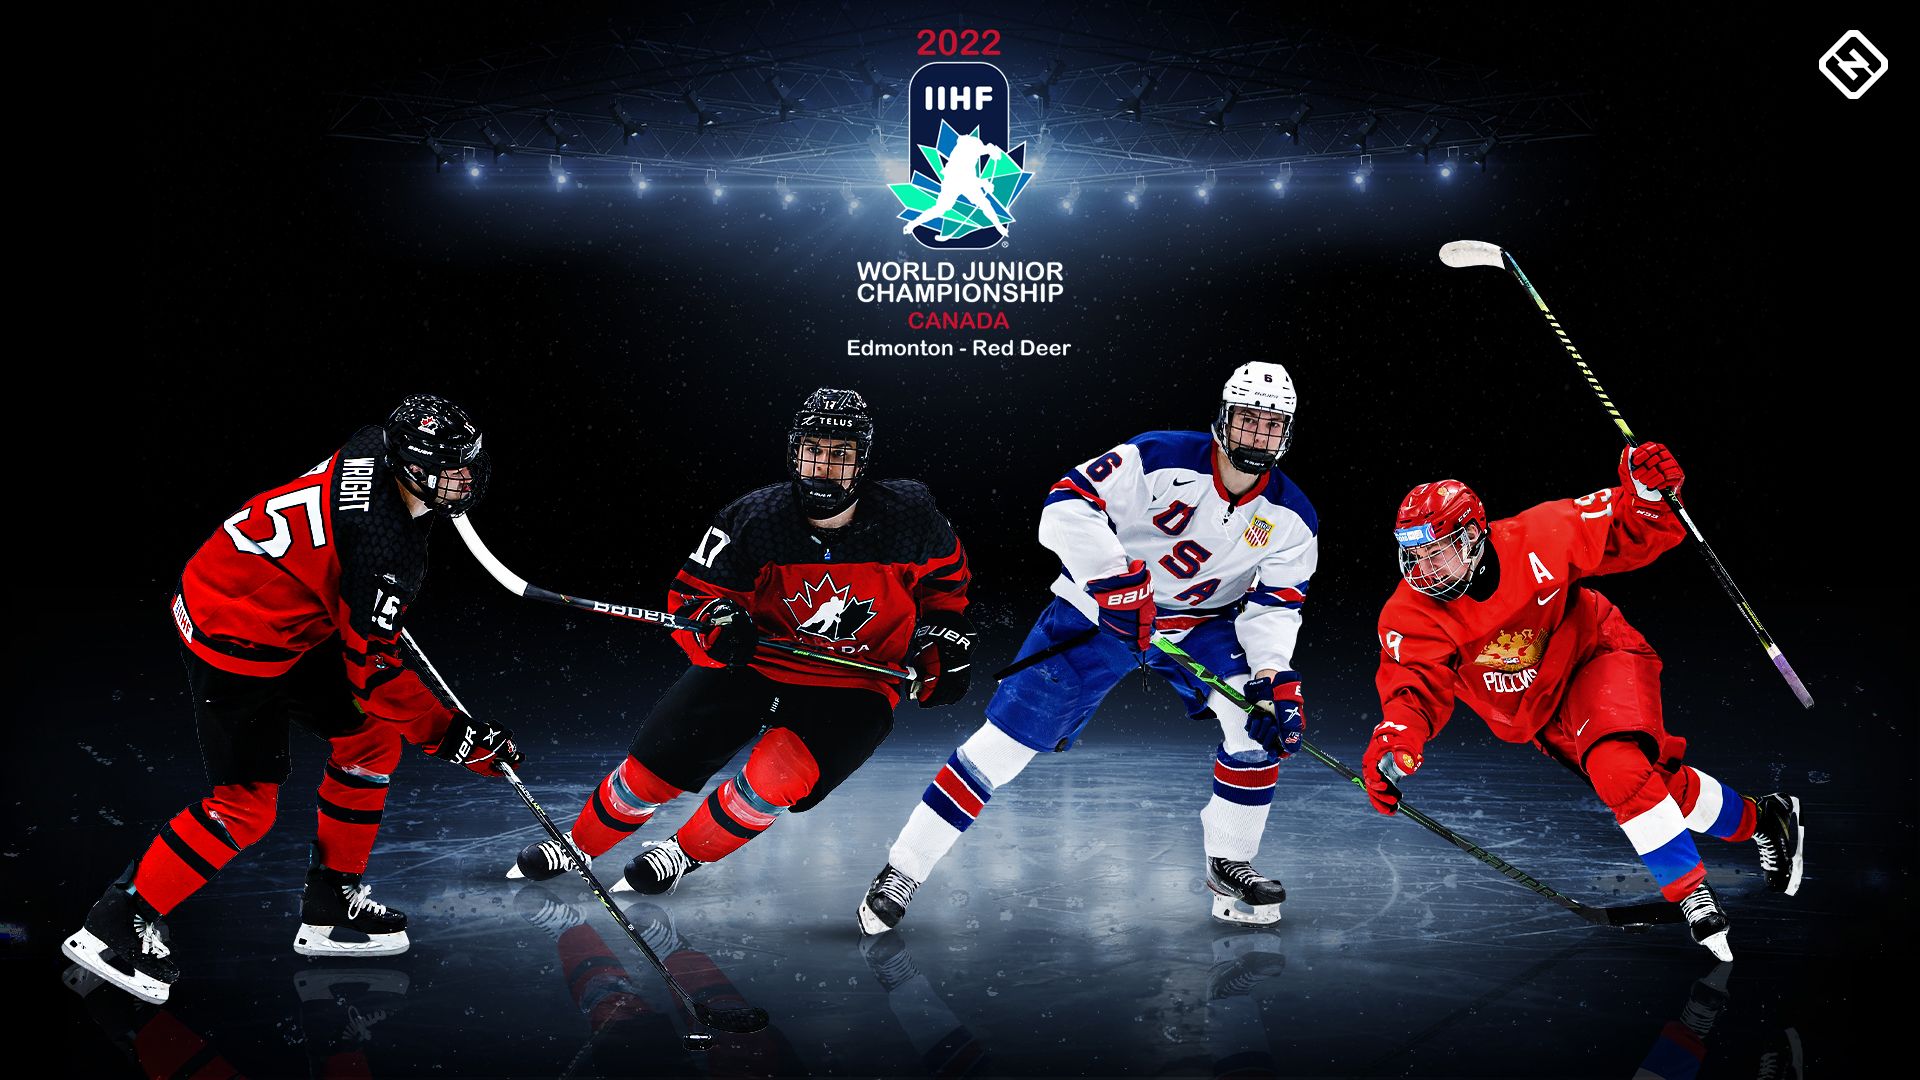 Standings and Game Results of the 2022 IIHF World Junior Championship